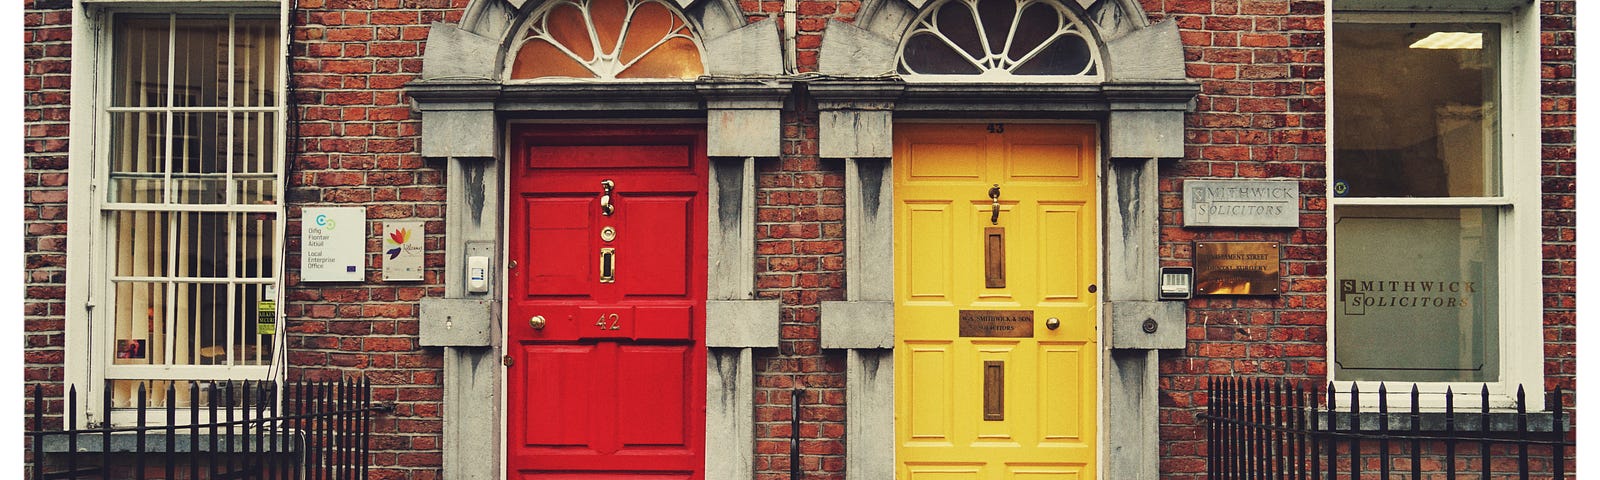 A shot of two front doors side by side, one red and one yellow